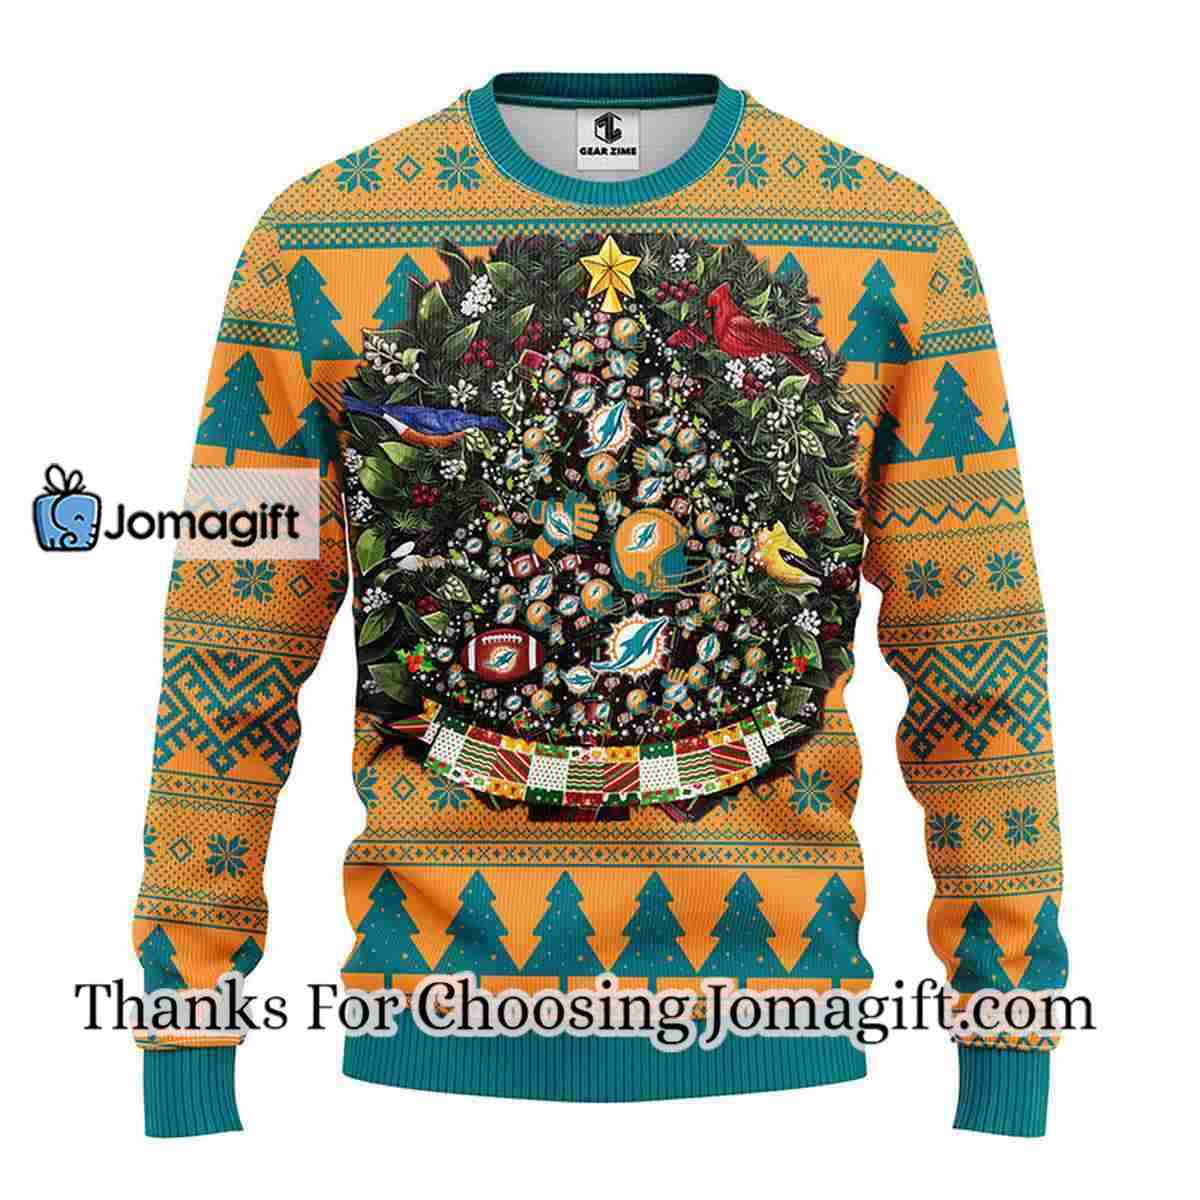 Miami Dolphins Shop - Miami Dolphins Tree Ball Christmas Ugly Sweater 1